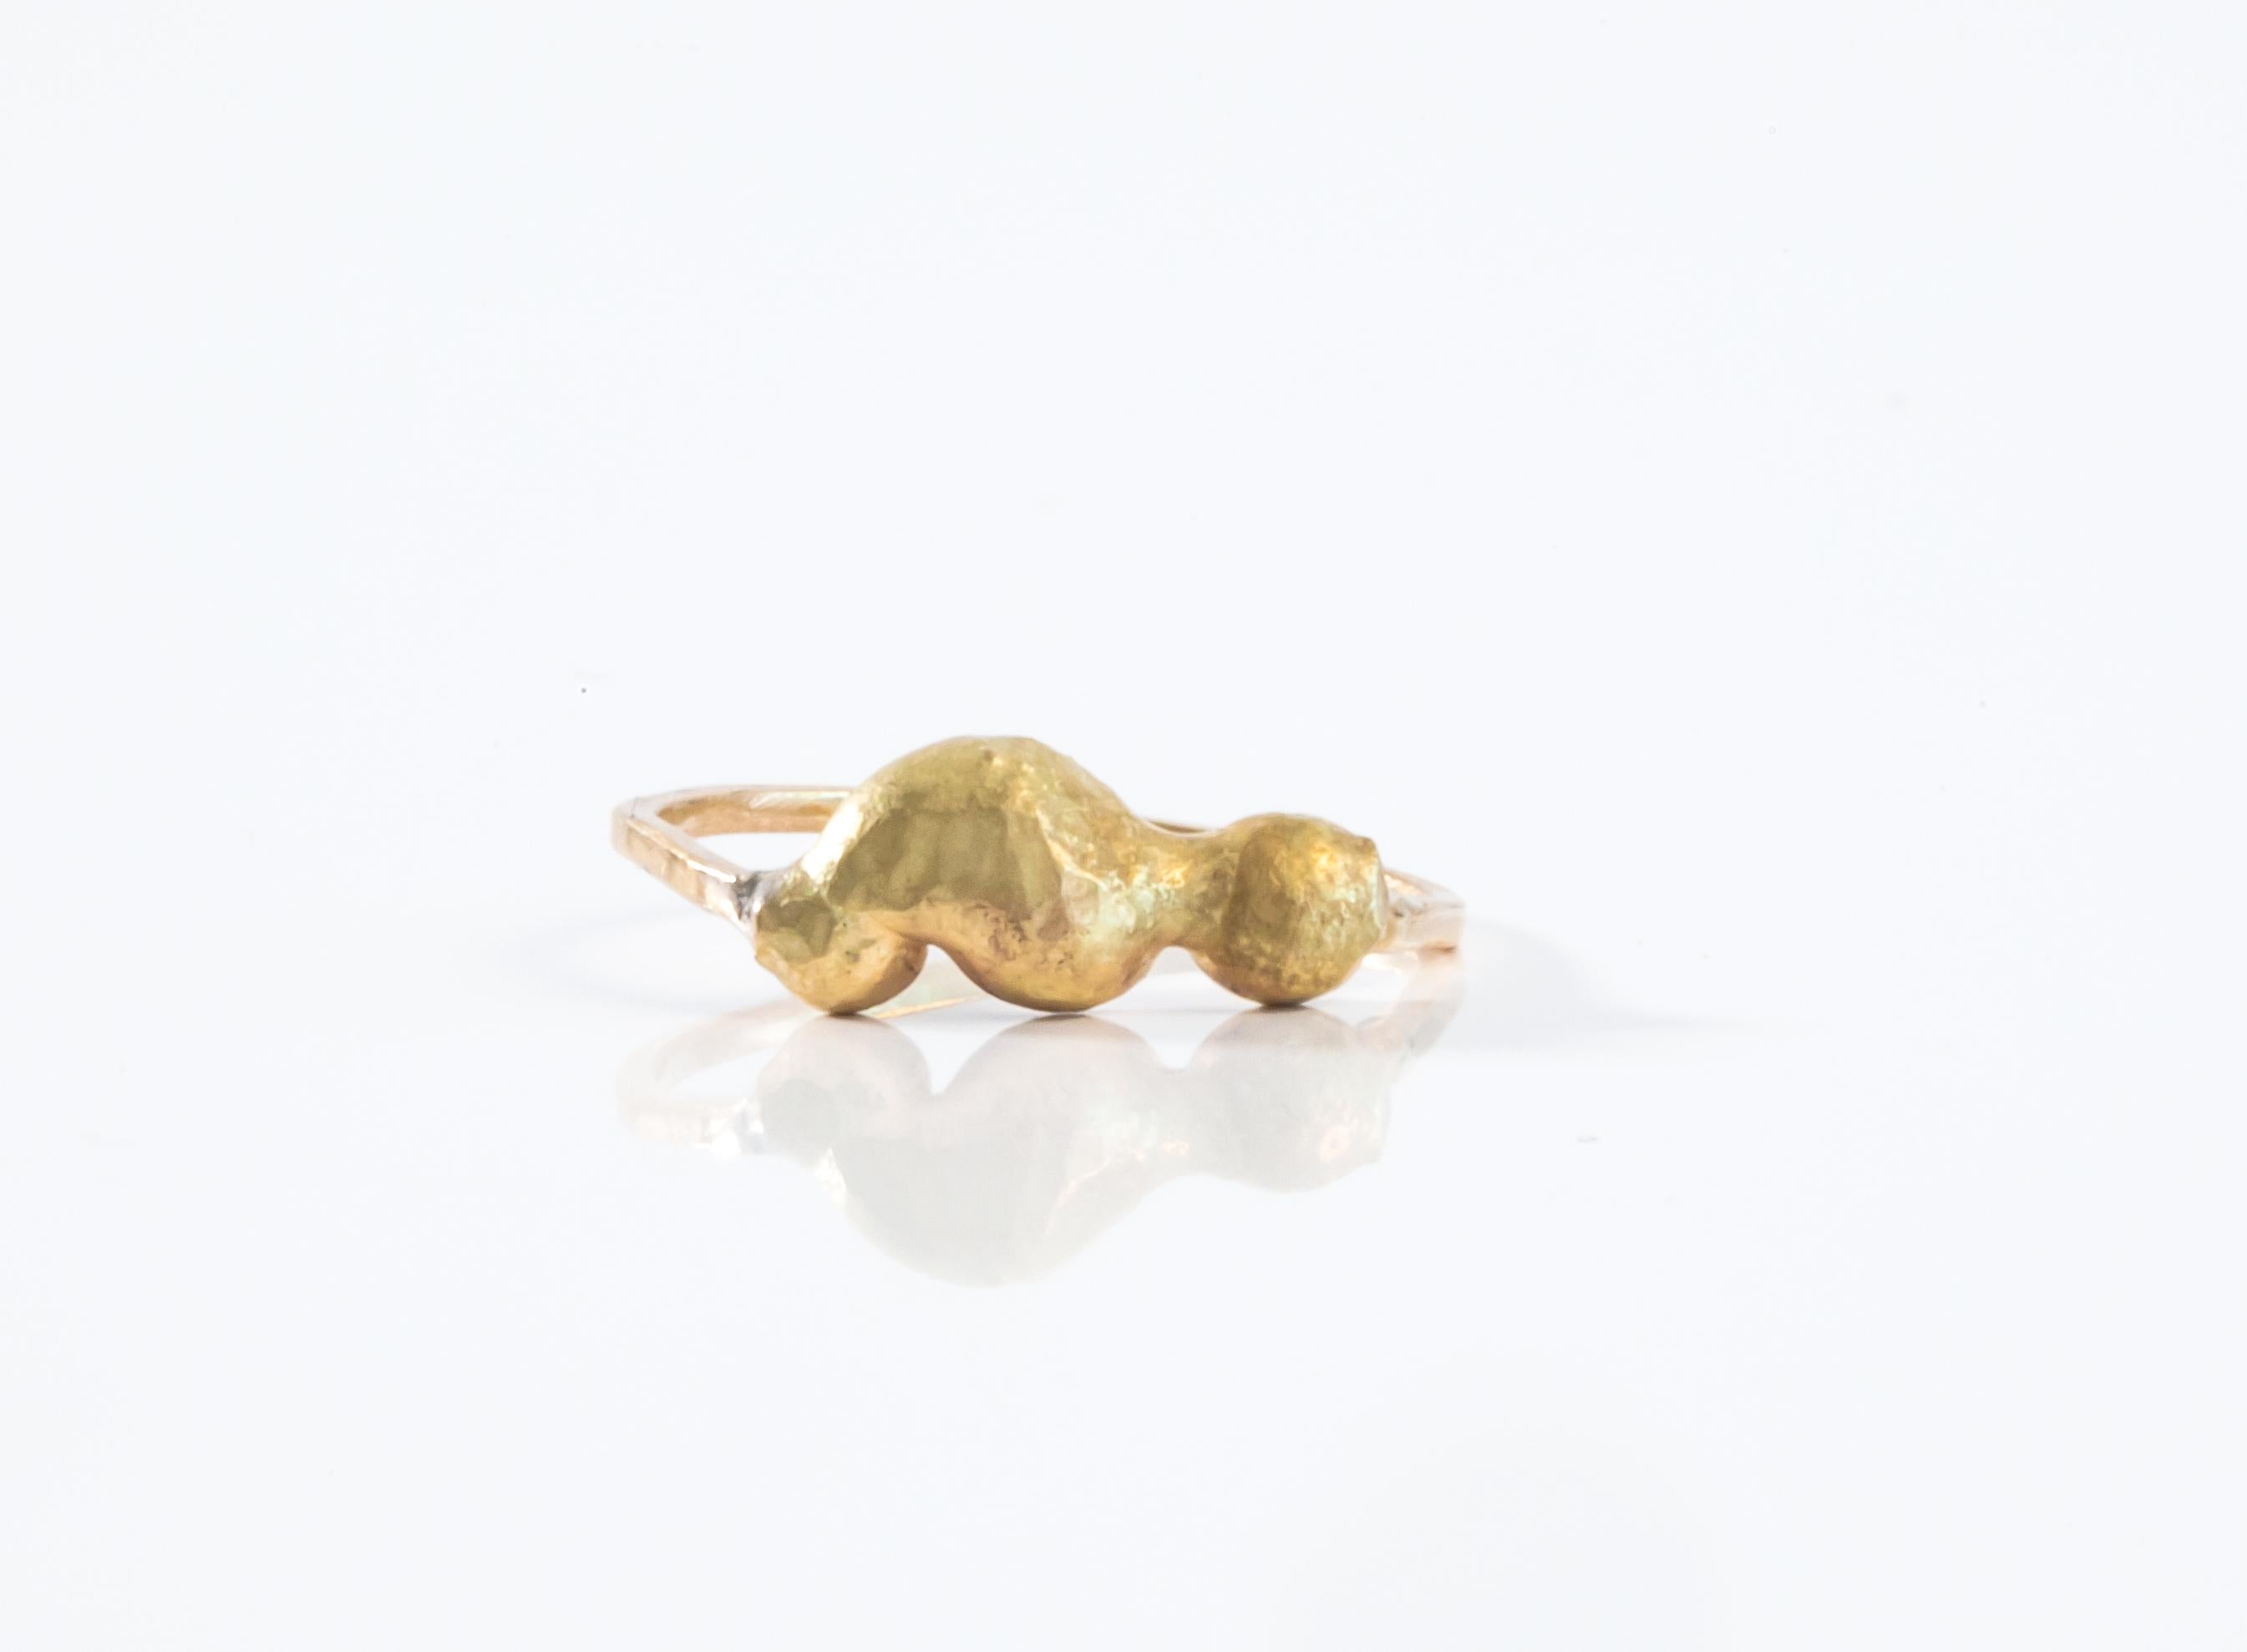 Wonderful, natural and biomorphic shaped gold ring. Designed and made by Norwegian silversmith Hedvig Sommerfeldt. This is a one-off piece made for exhibition. The ring is subtle and yet so organic and alluring.